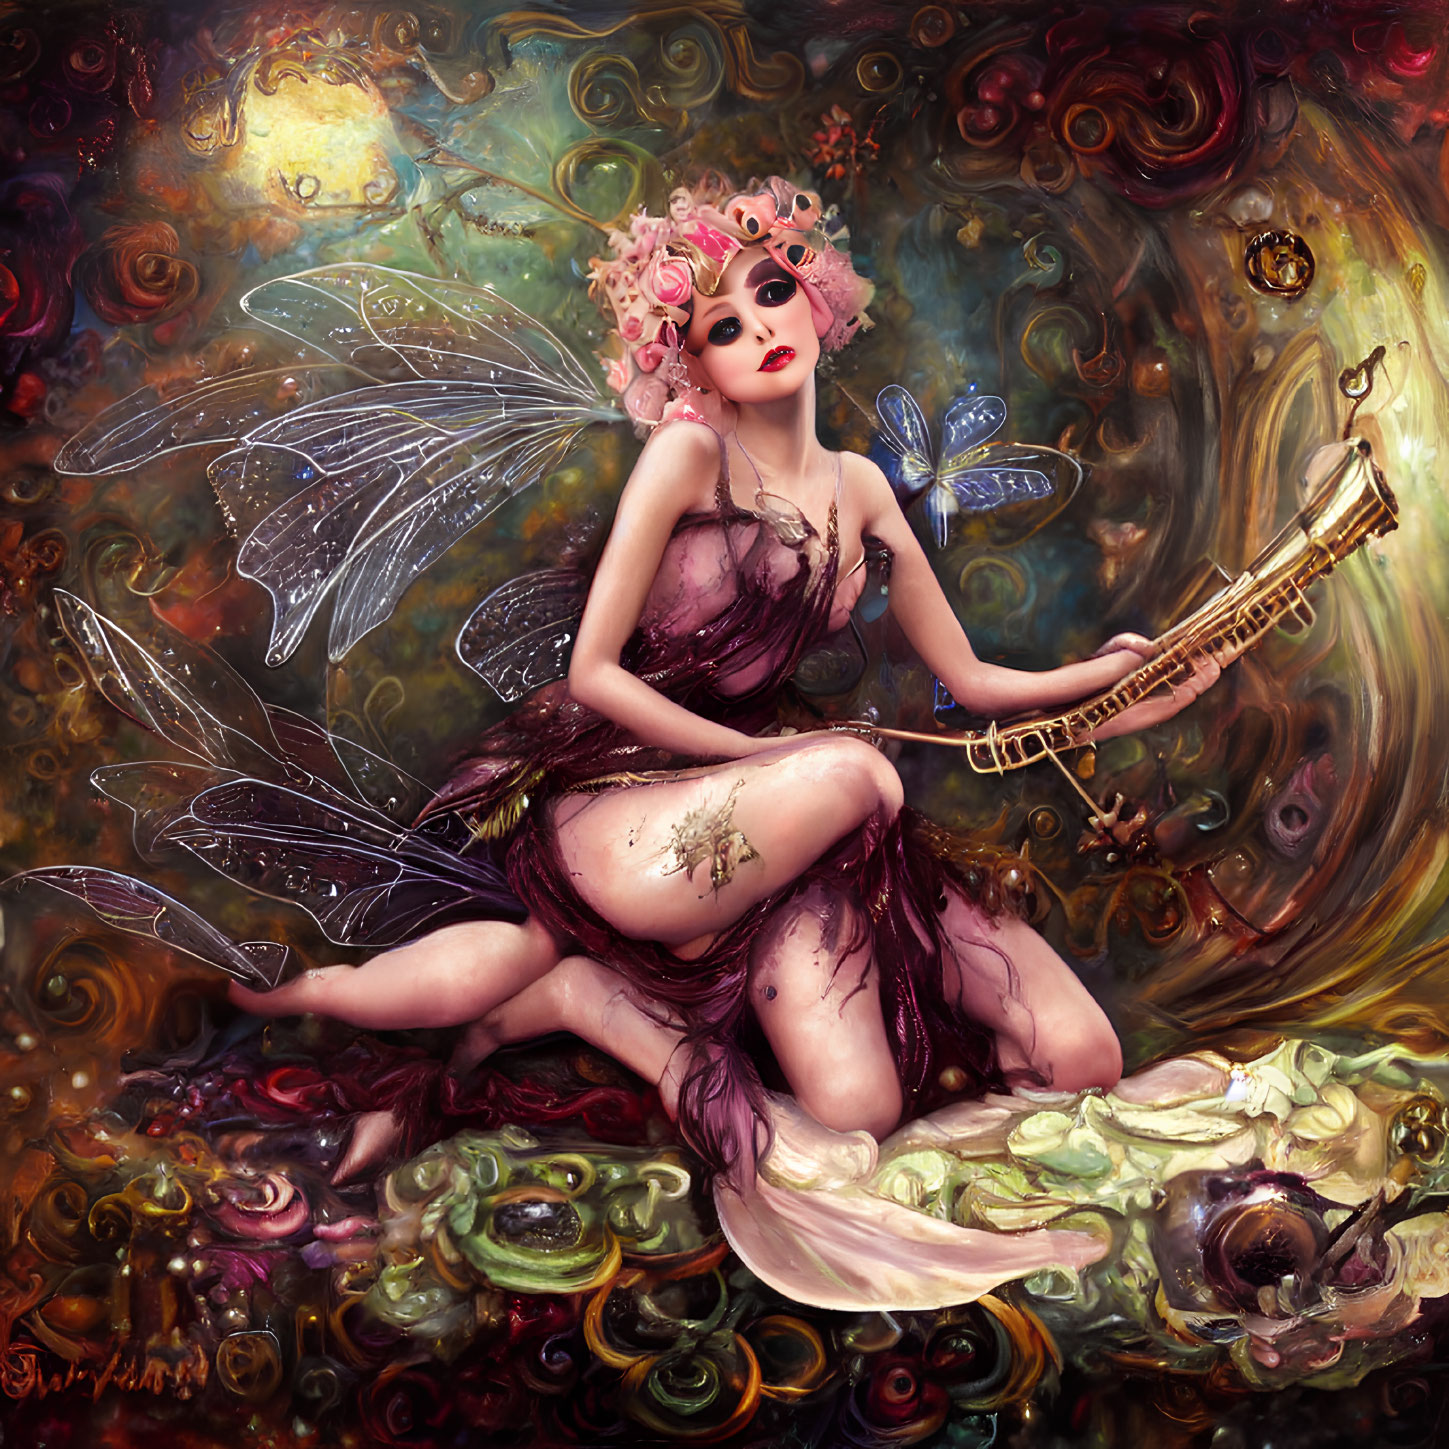 Iridescent fairy with floral headpiece playing saxophone in celestial backdrop